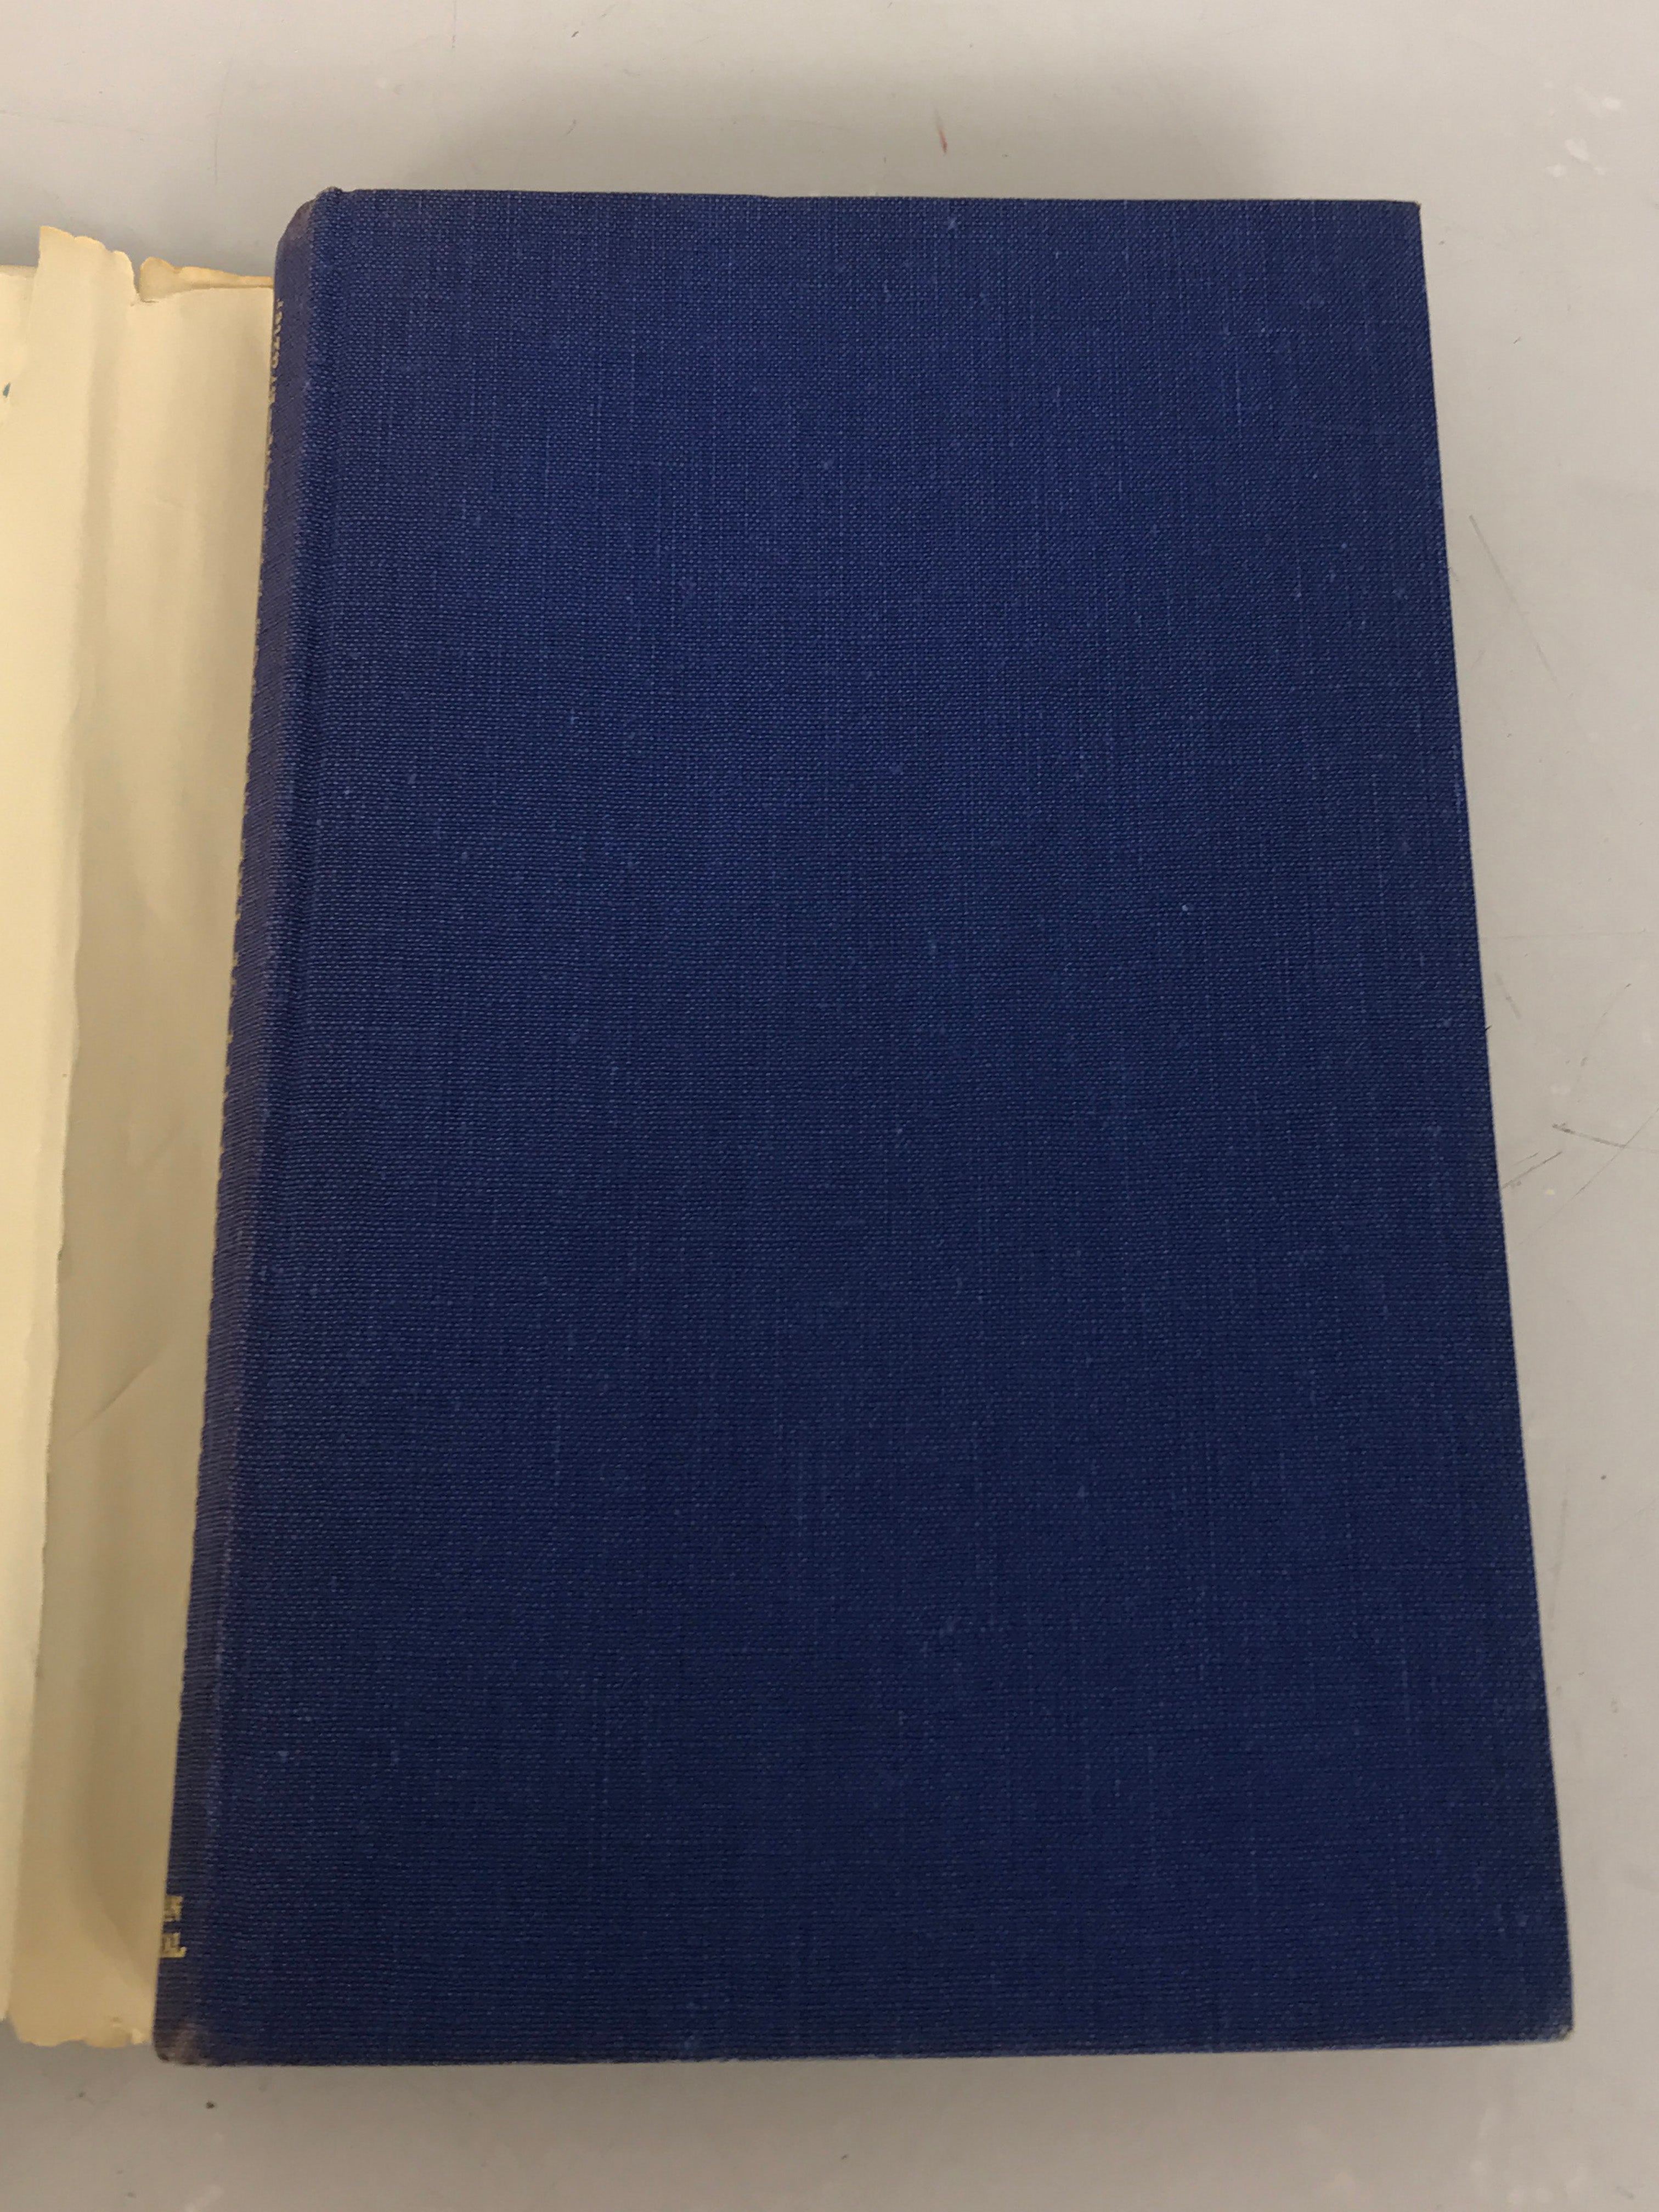 The Electrical Activity of the Nervous System 2nd Edition by Mary A.B. Brazier 1966 HC DJ